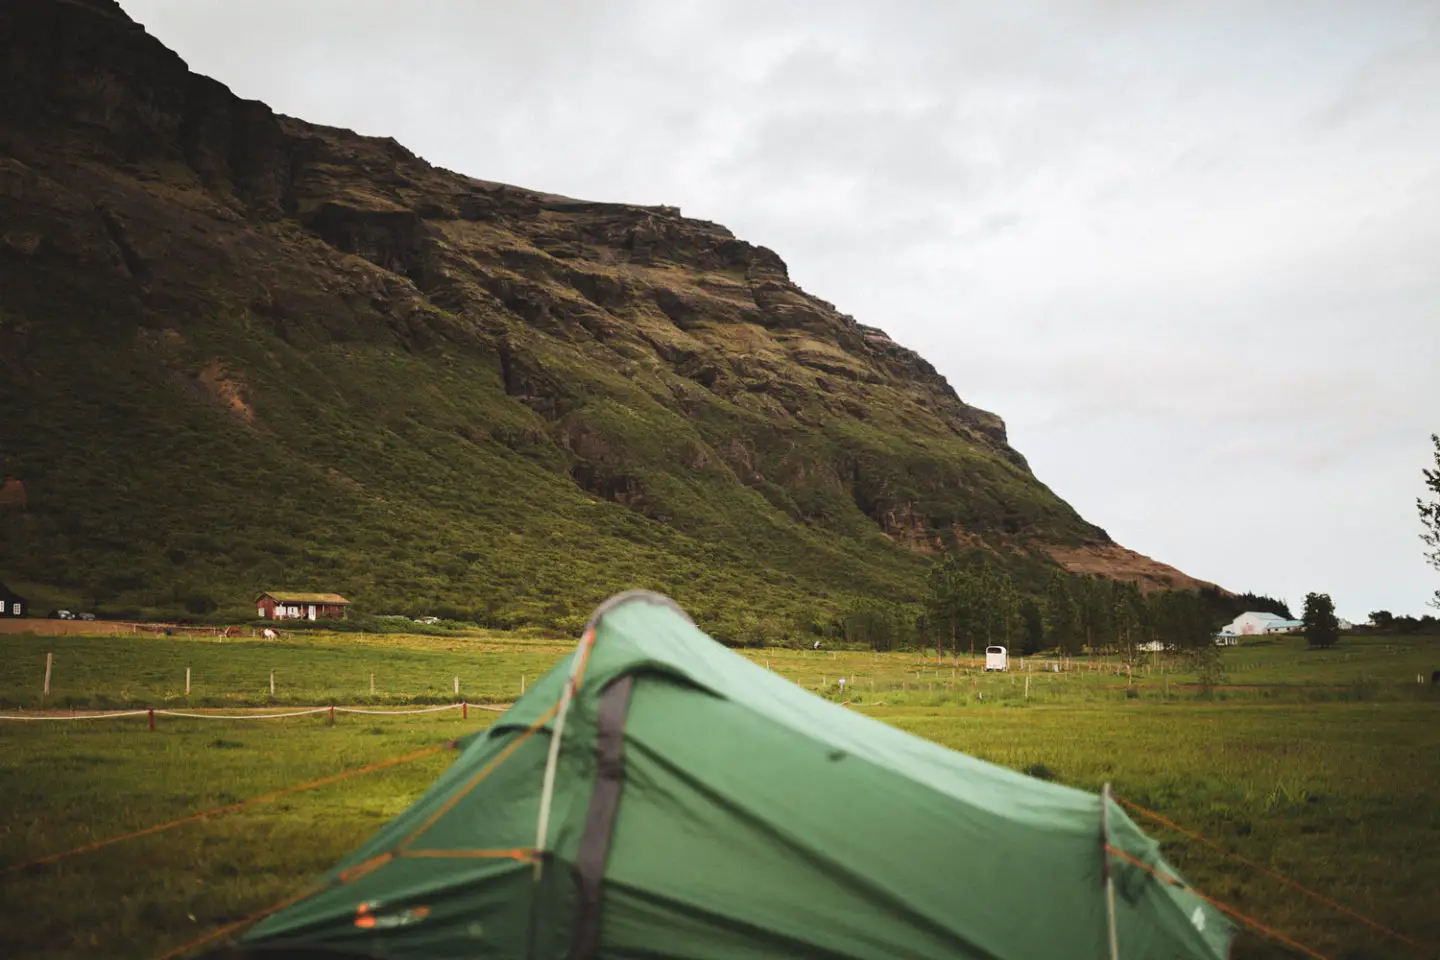 There are many great places to camp in Iceland, but I have done all the dirty work for you and made an epic Iceland camping list of all the best campsites in Iceland, including a special bonus campground. If you’re planning an Iceland tent or campervan itinerary, don’t forget to add these into your road trip so you can soak up the best views and sites in Iceland #icelandcamping #iceland #icelandtravel